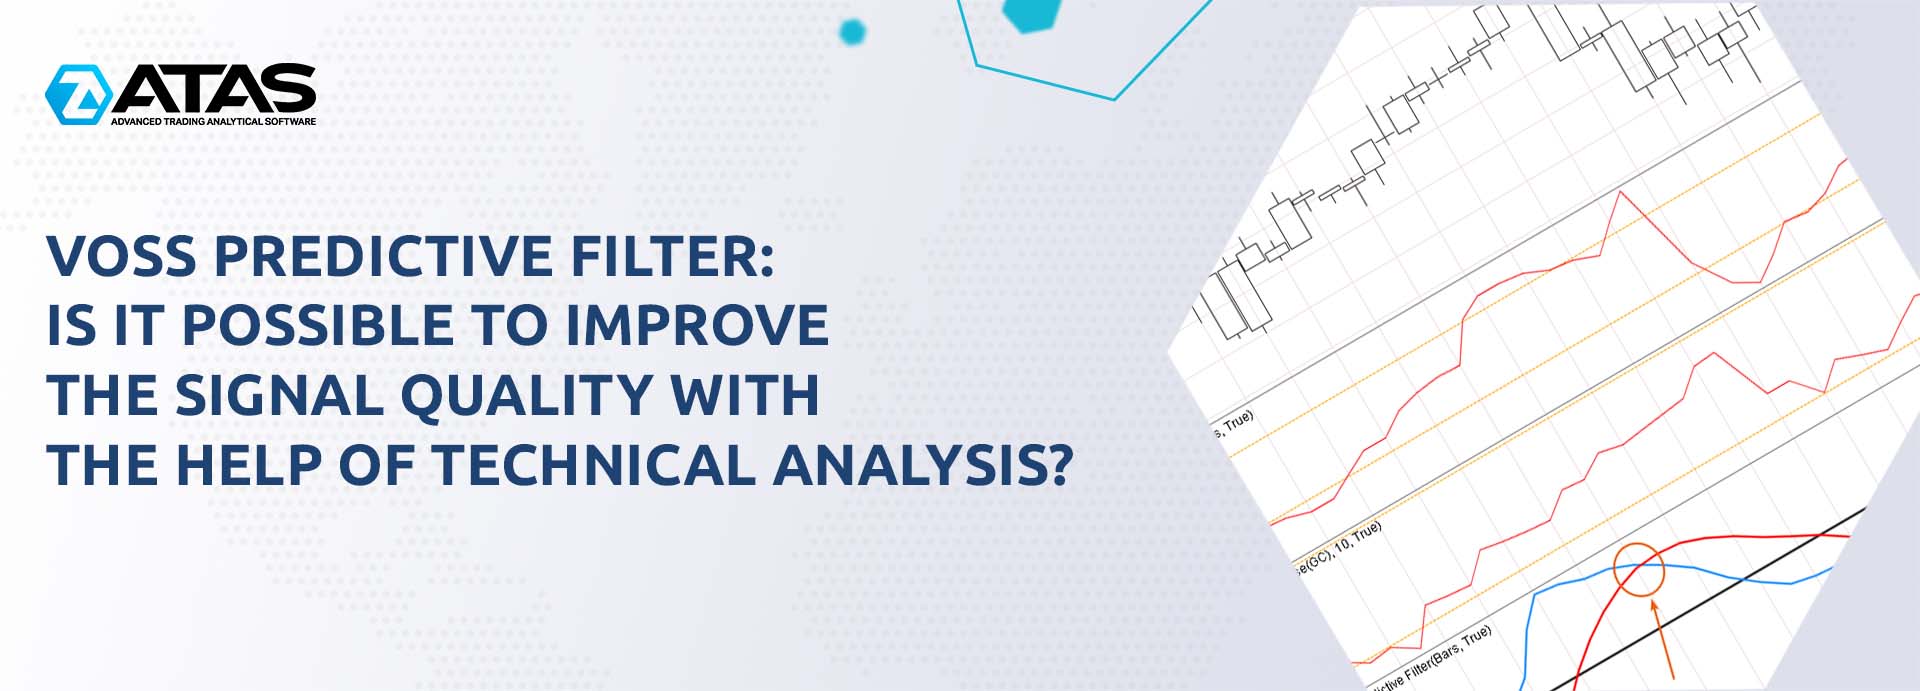 Voss Predictive Filter: is it possible to improve the signal quality with the help of technical analysis?